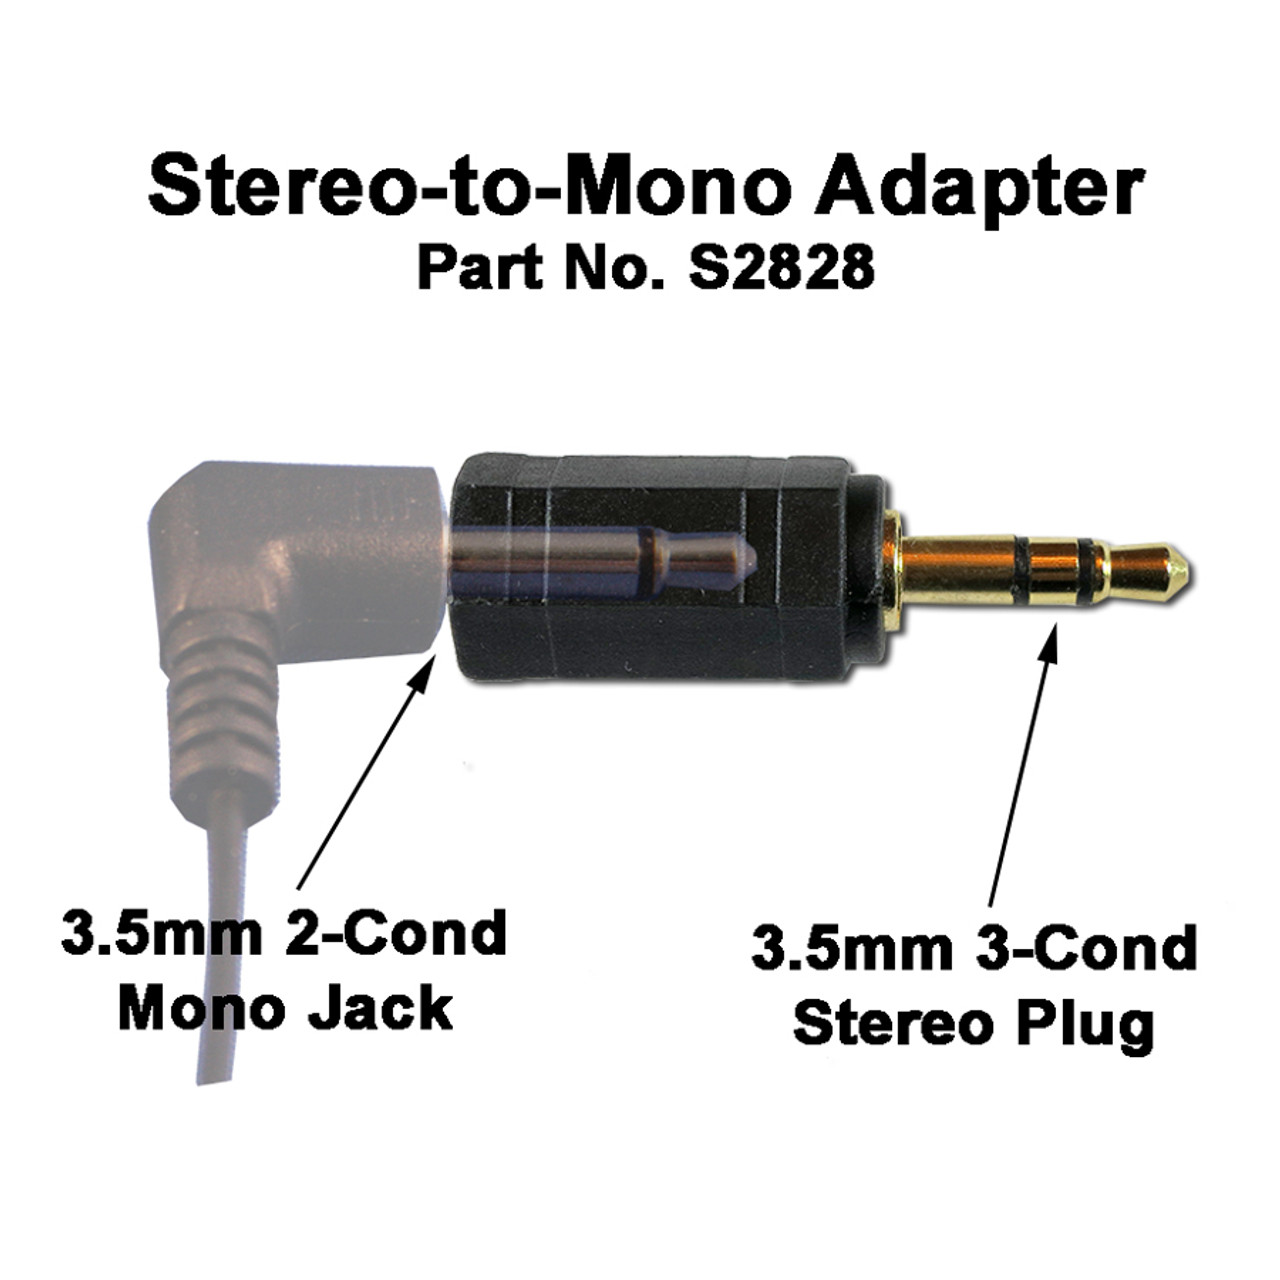 Sofocar Inseguro Iluminar Mono-to-Stereo Adapter Corrects Missing Sound from 1 Side